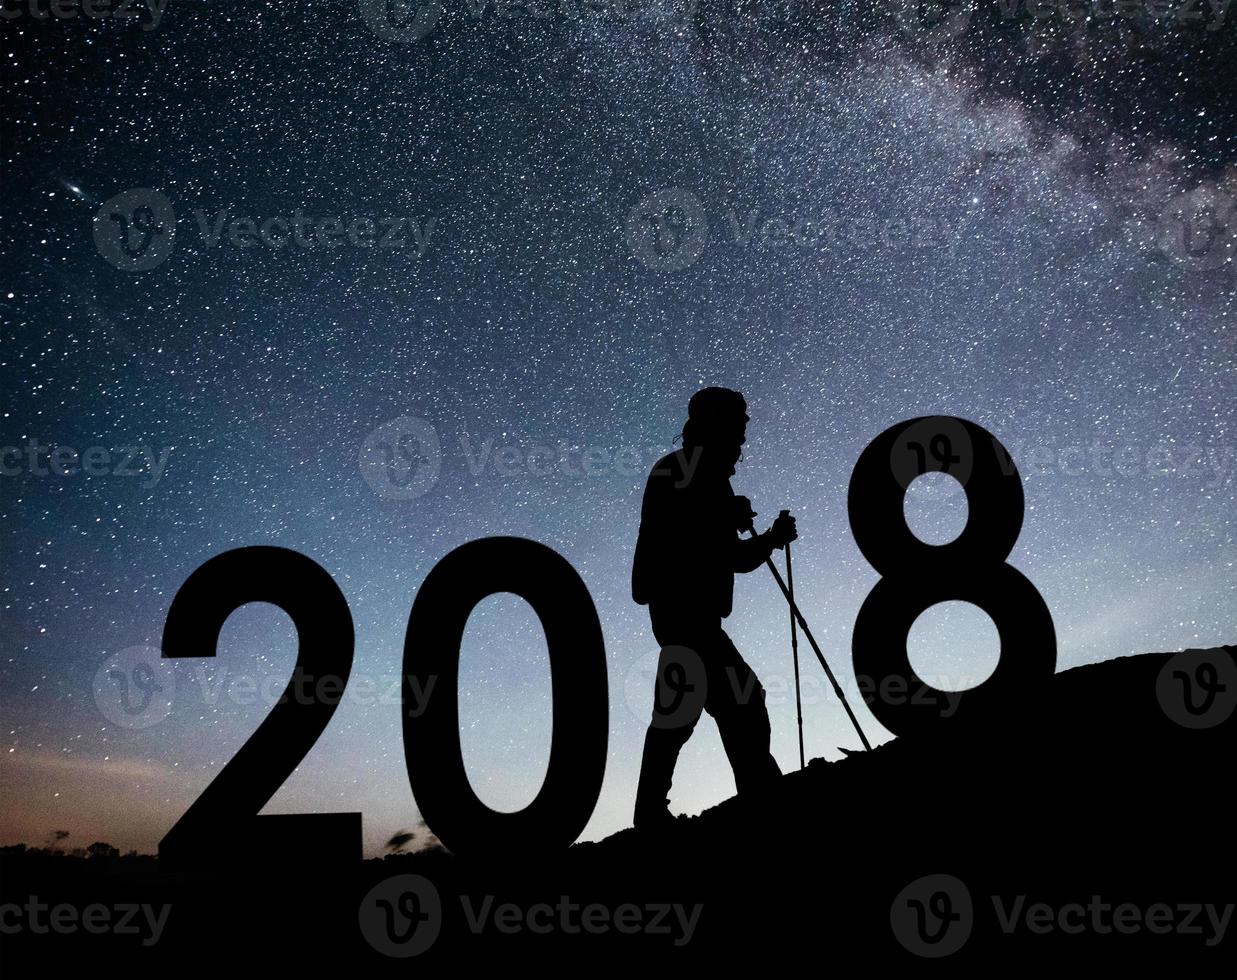 Silhouette young hiker man for 2018 new year background of the Milky Way galaxy on a bright star dark sky tone photo